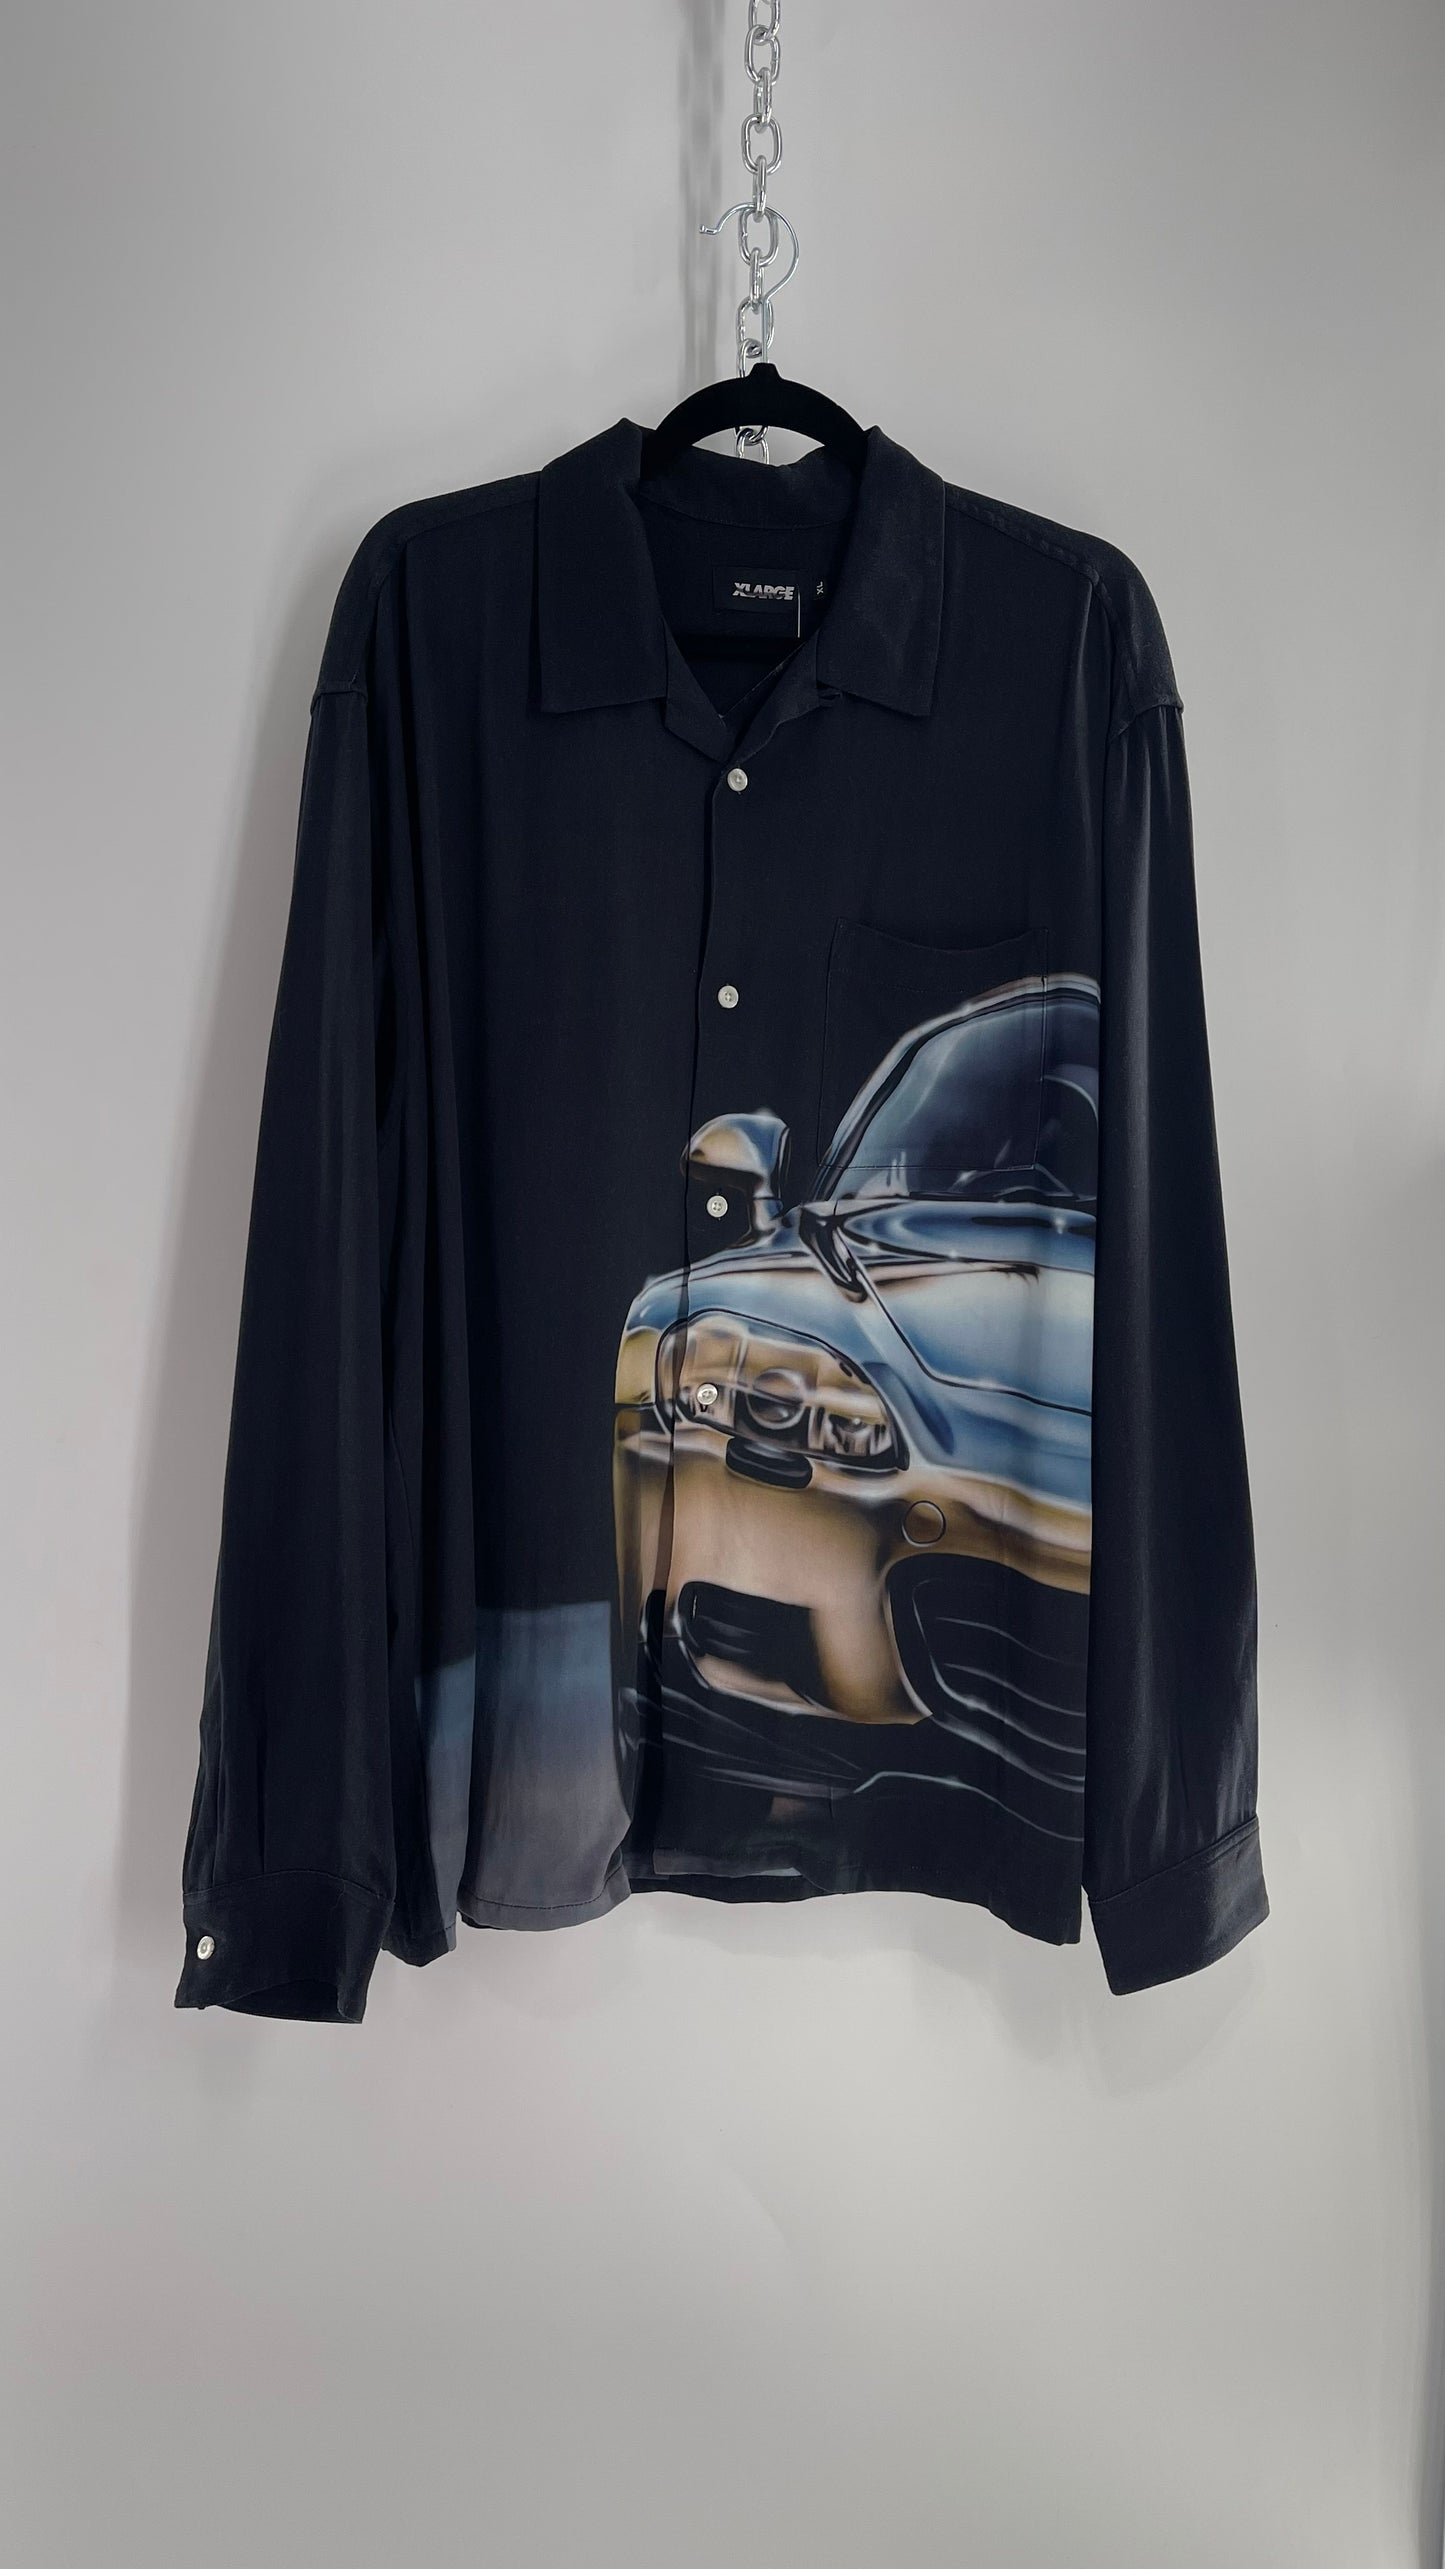 XLARGE Black 100% Rayon Men’s Button Up with HD Futuristic Car Graphic  (XL)